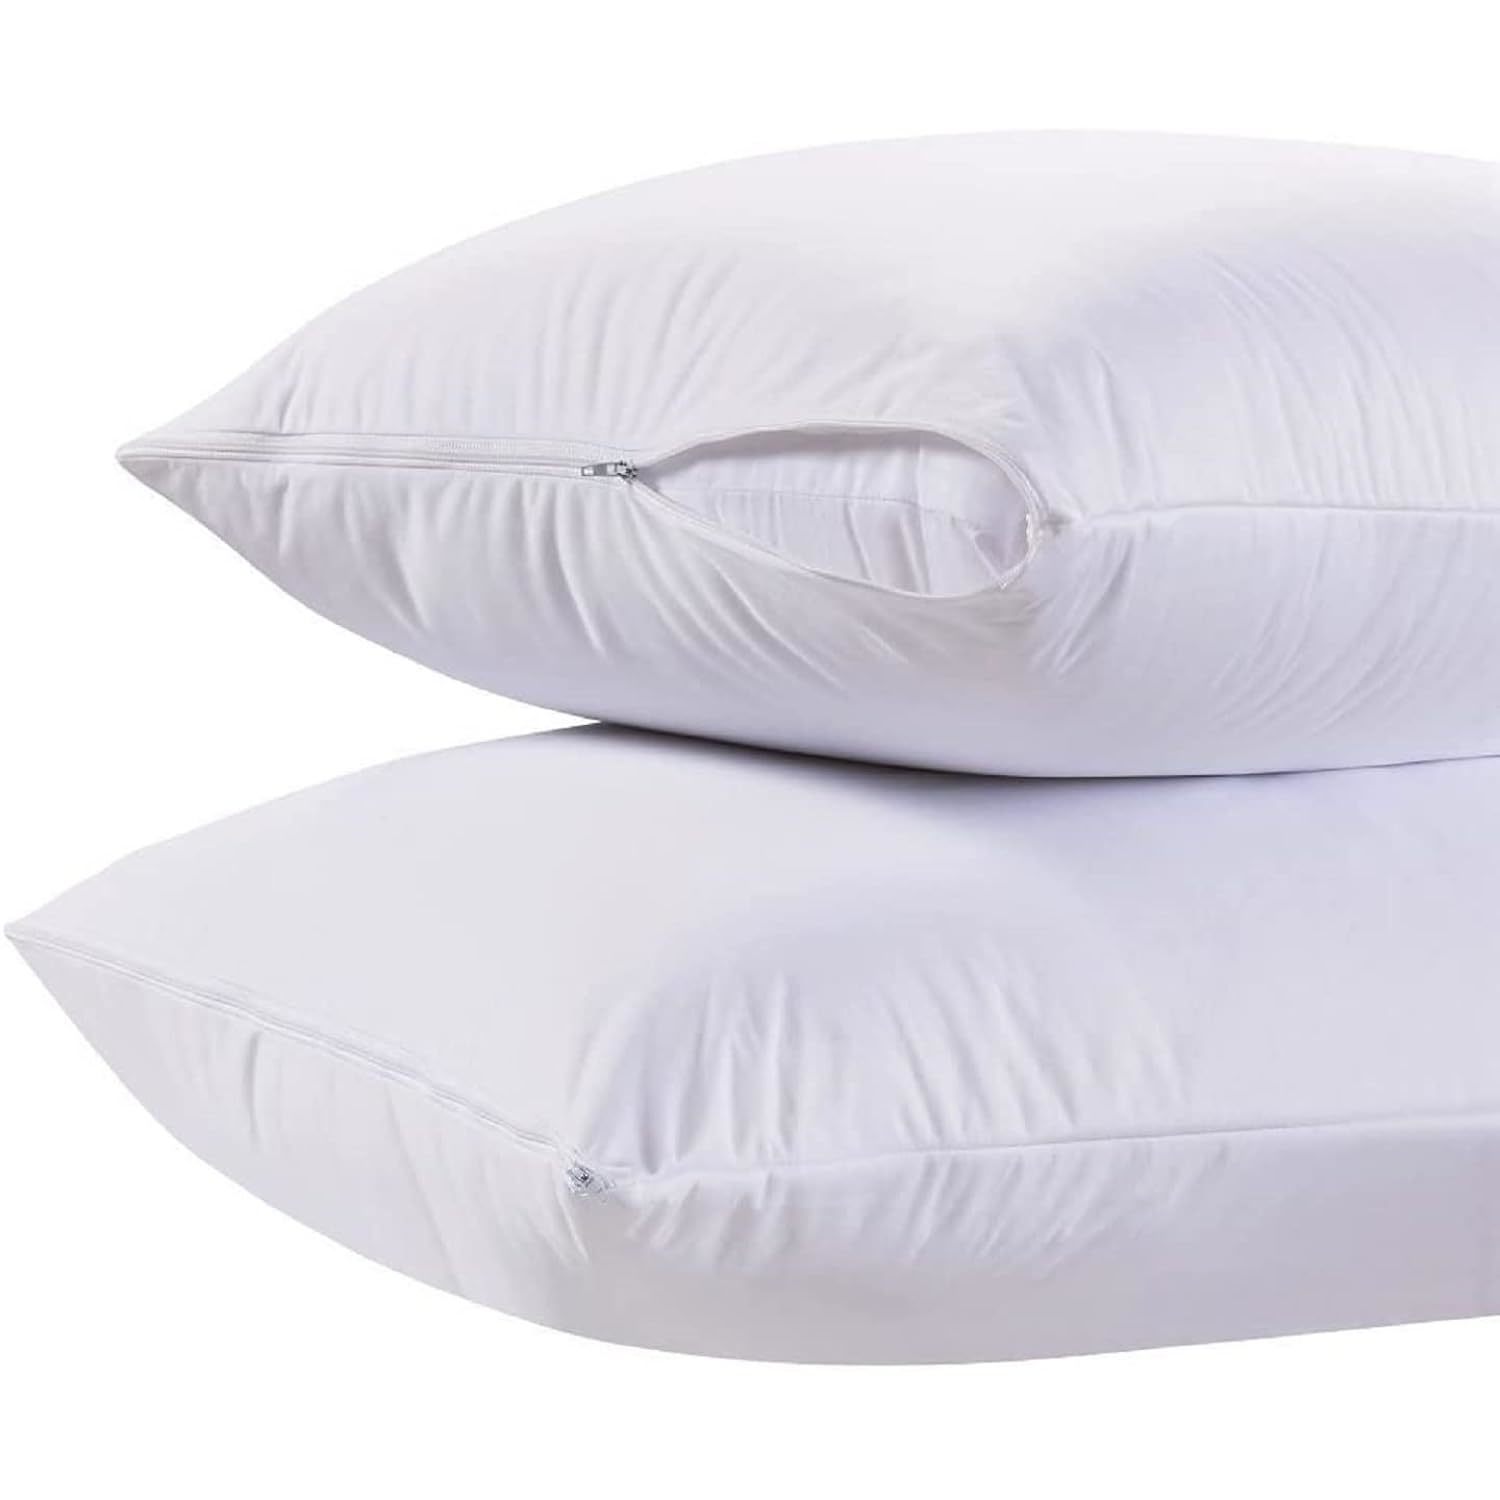 Zippered Style Pillow Case Cover - Luxury Hotel Collection 200 Thread Count, Sof - $19.99